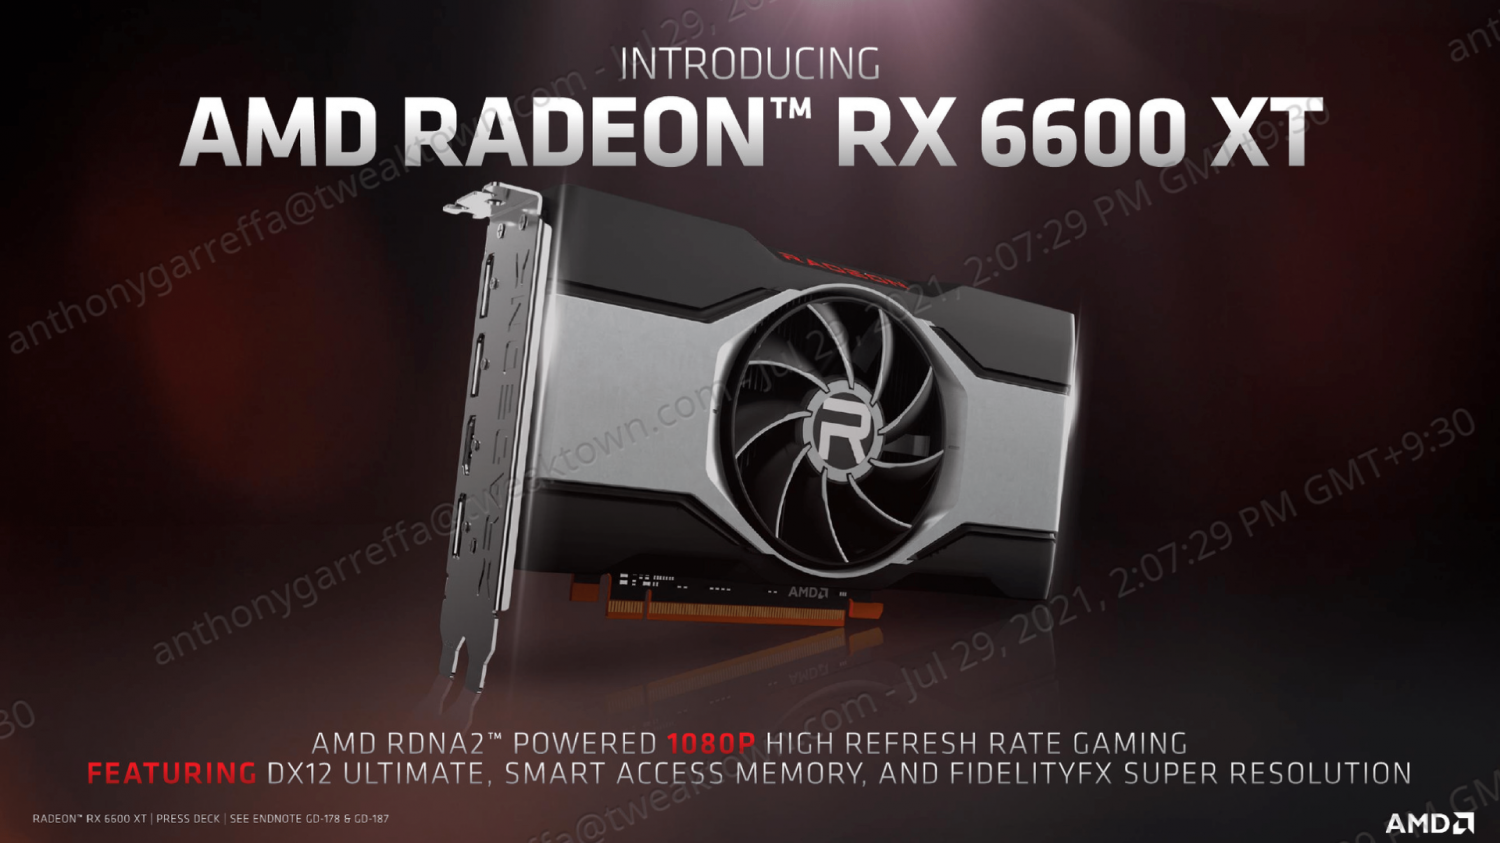 AMD Radeon RX 6600 XT: 8GB GDDR6, launches August 11 for $379